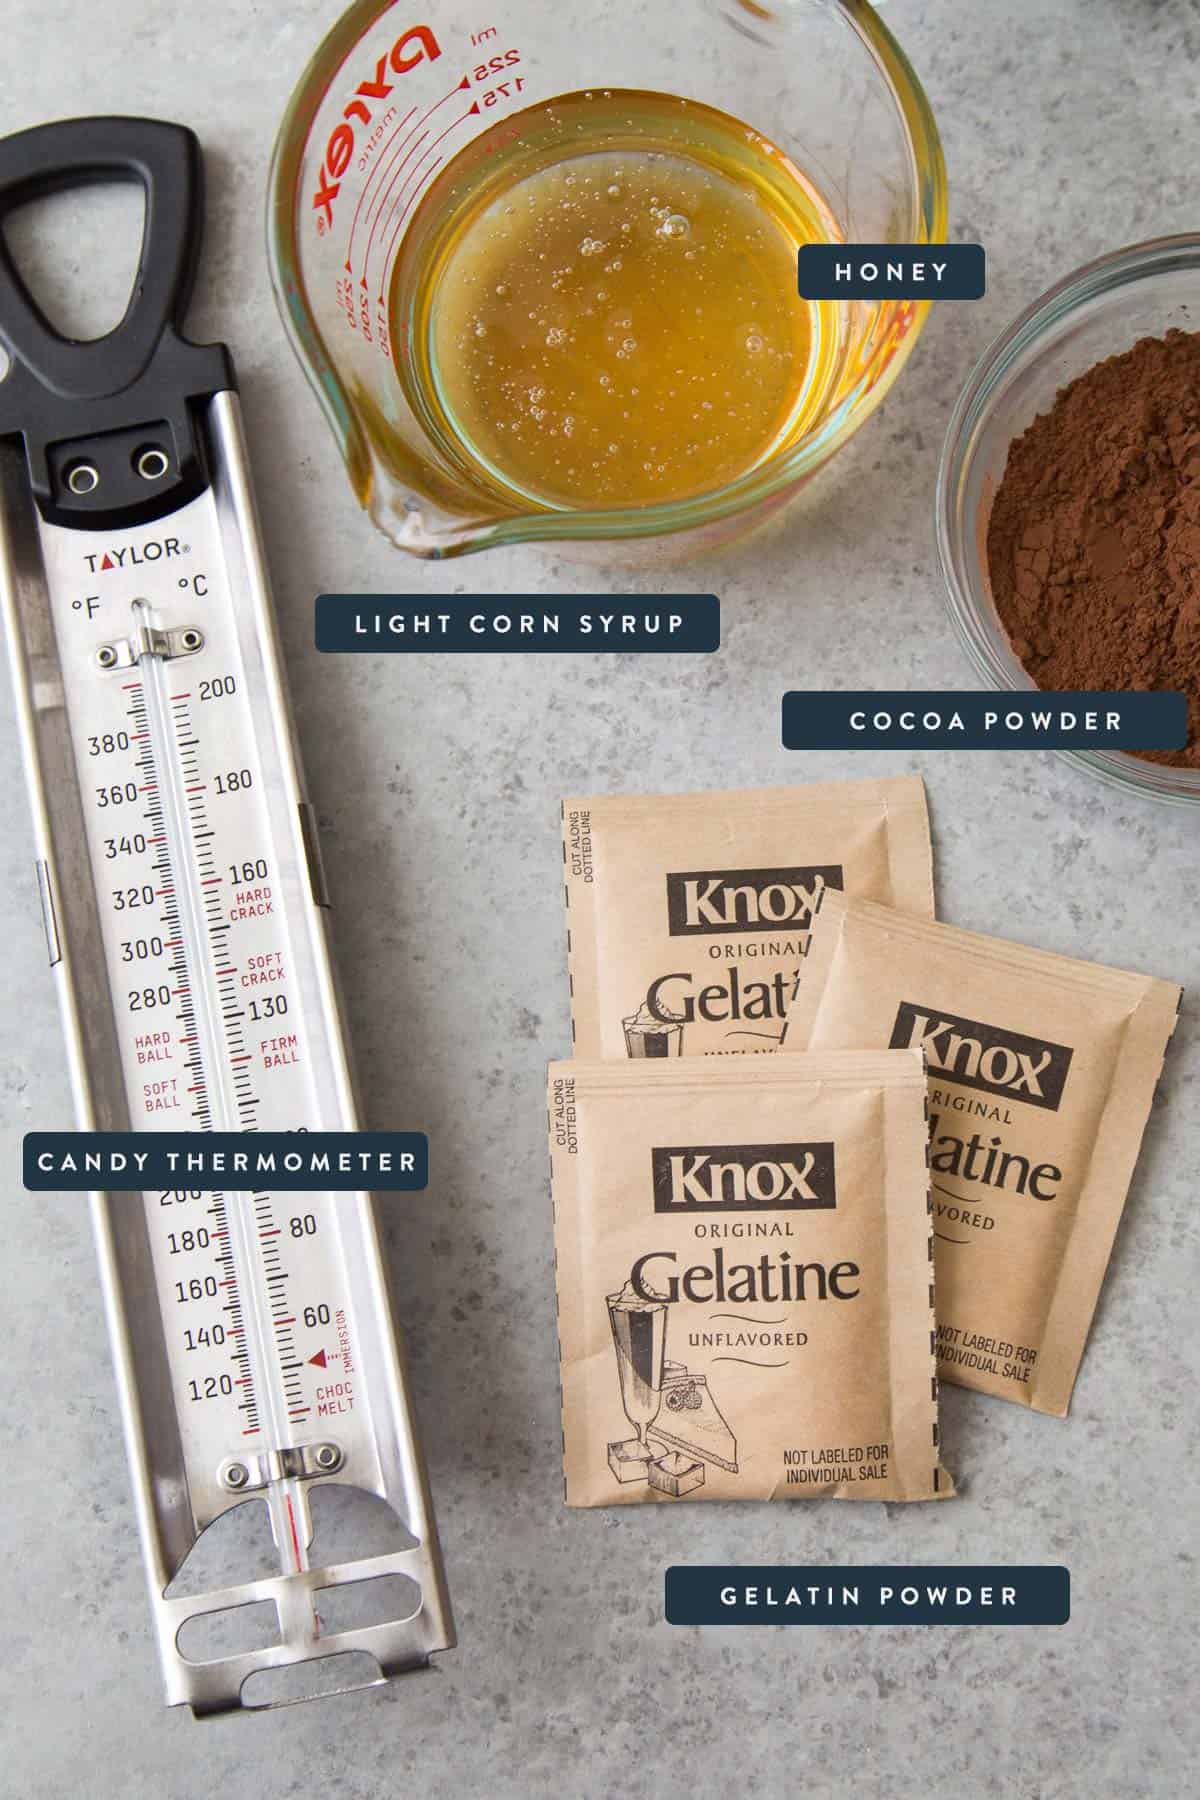 key tools and ingredients for chocolate marshmallow includes candy thermometer, gelatin powder, and light corn syrup.